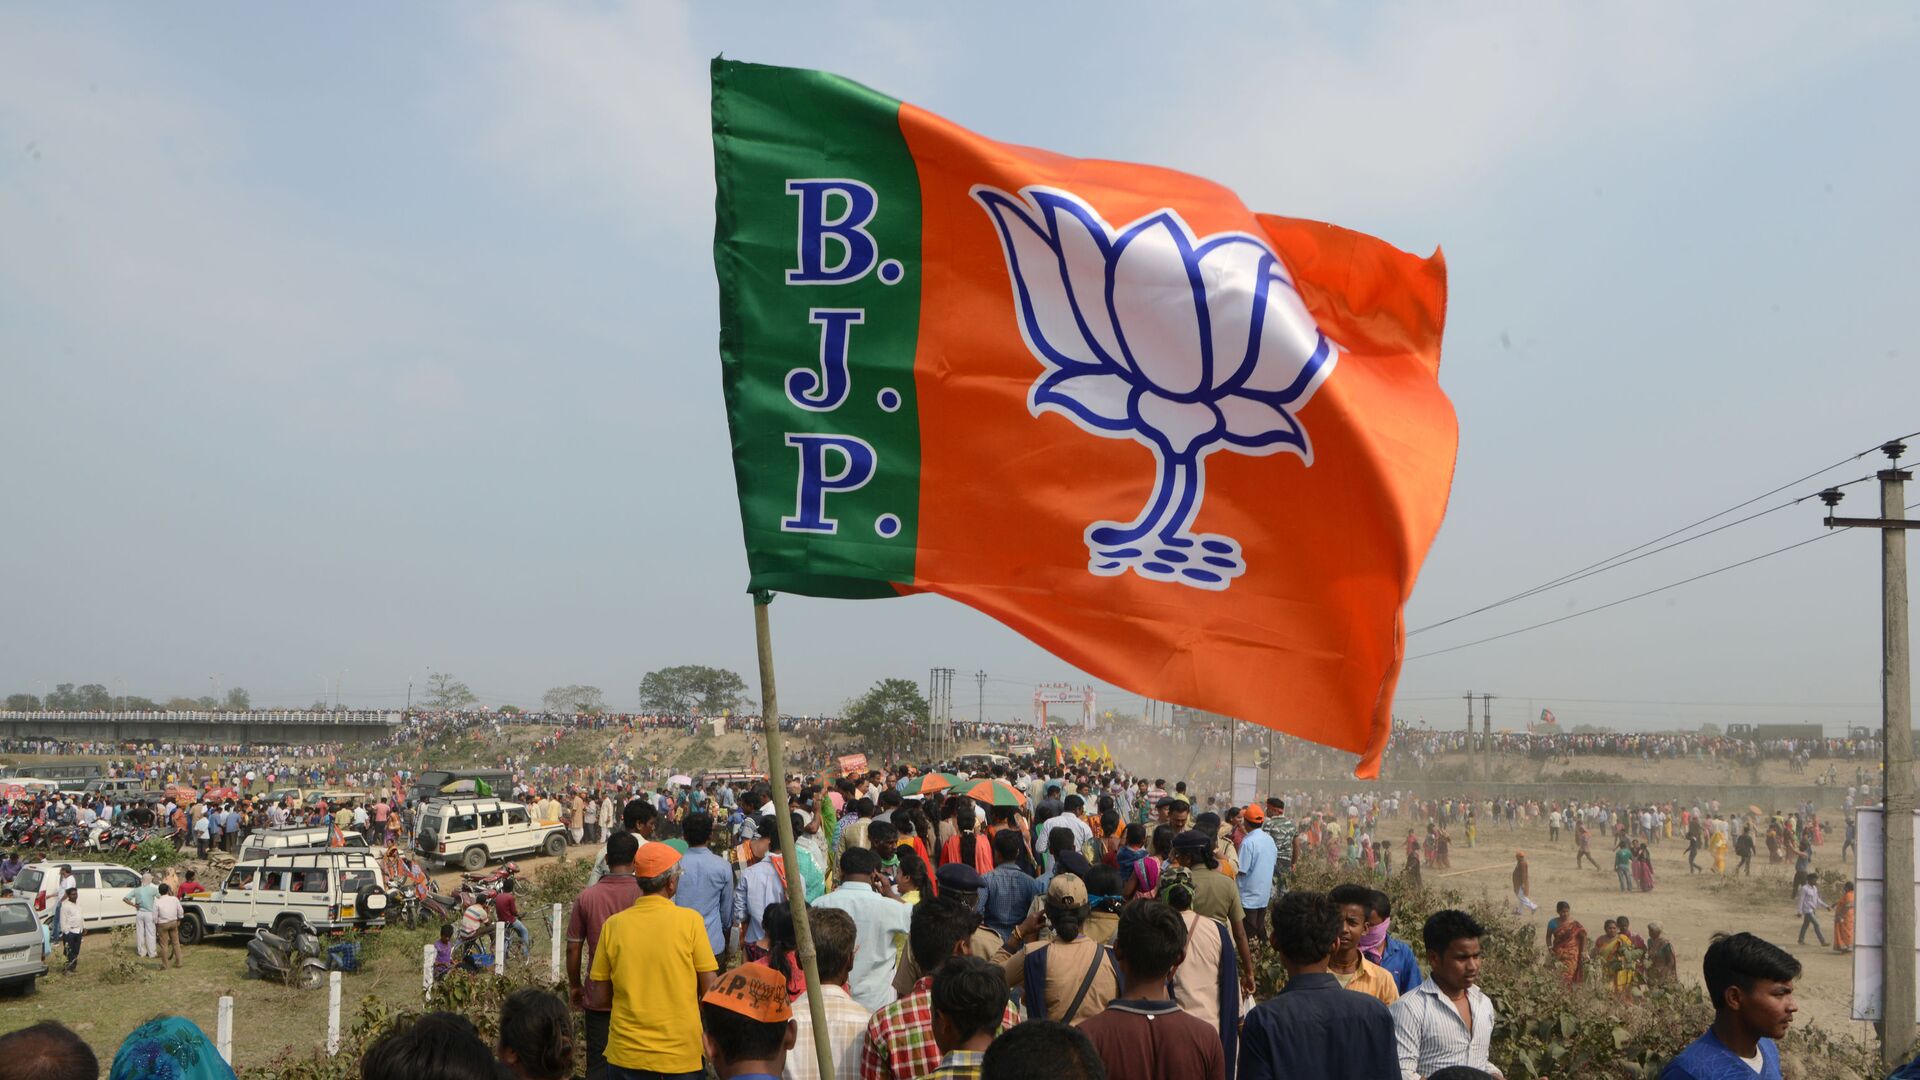 Indian supporters of the Bharatiya Janata Party (BJP) carry a party flag on their way to attend a campaign rally while wearing masks of Indian Prime Minister Narendra Modi ahead of the national elections in Siliguri on April 3, 2019 - Sputnik International, 1920, 25.02.2022